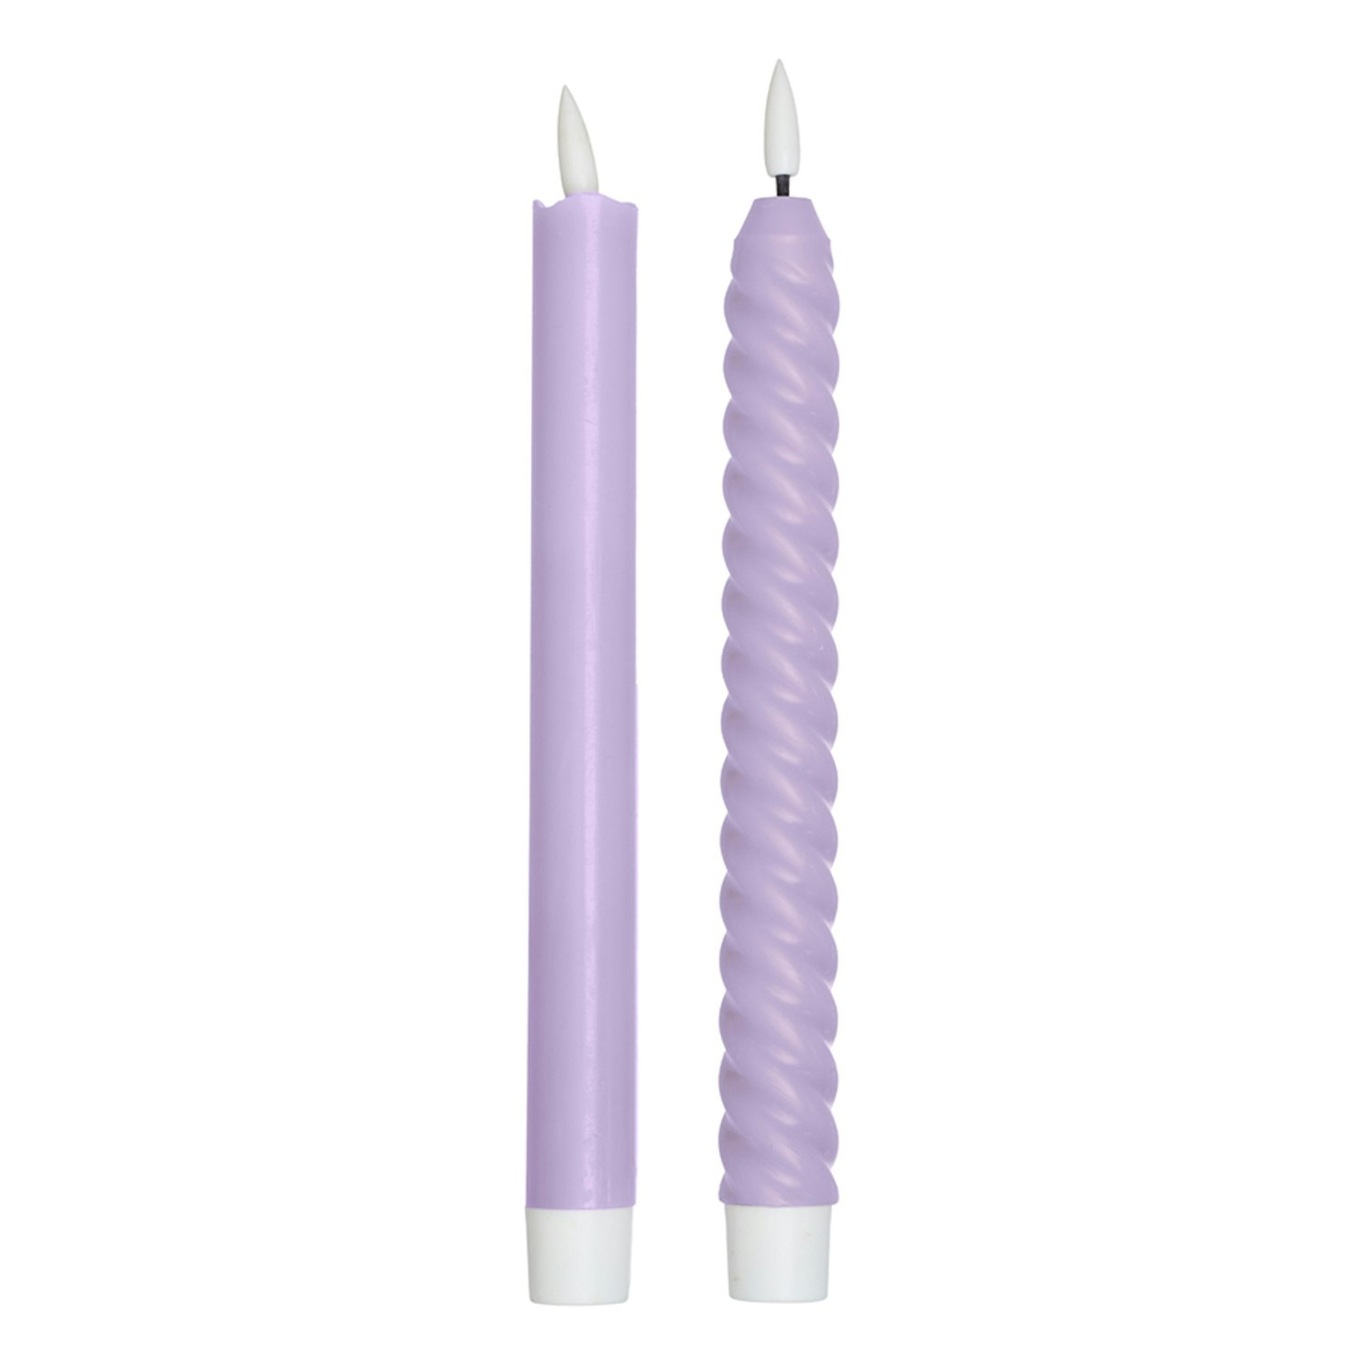 Cosy Forever Led Candles 2-pack, Lavender